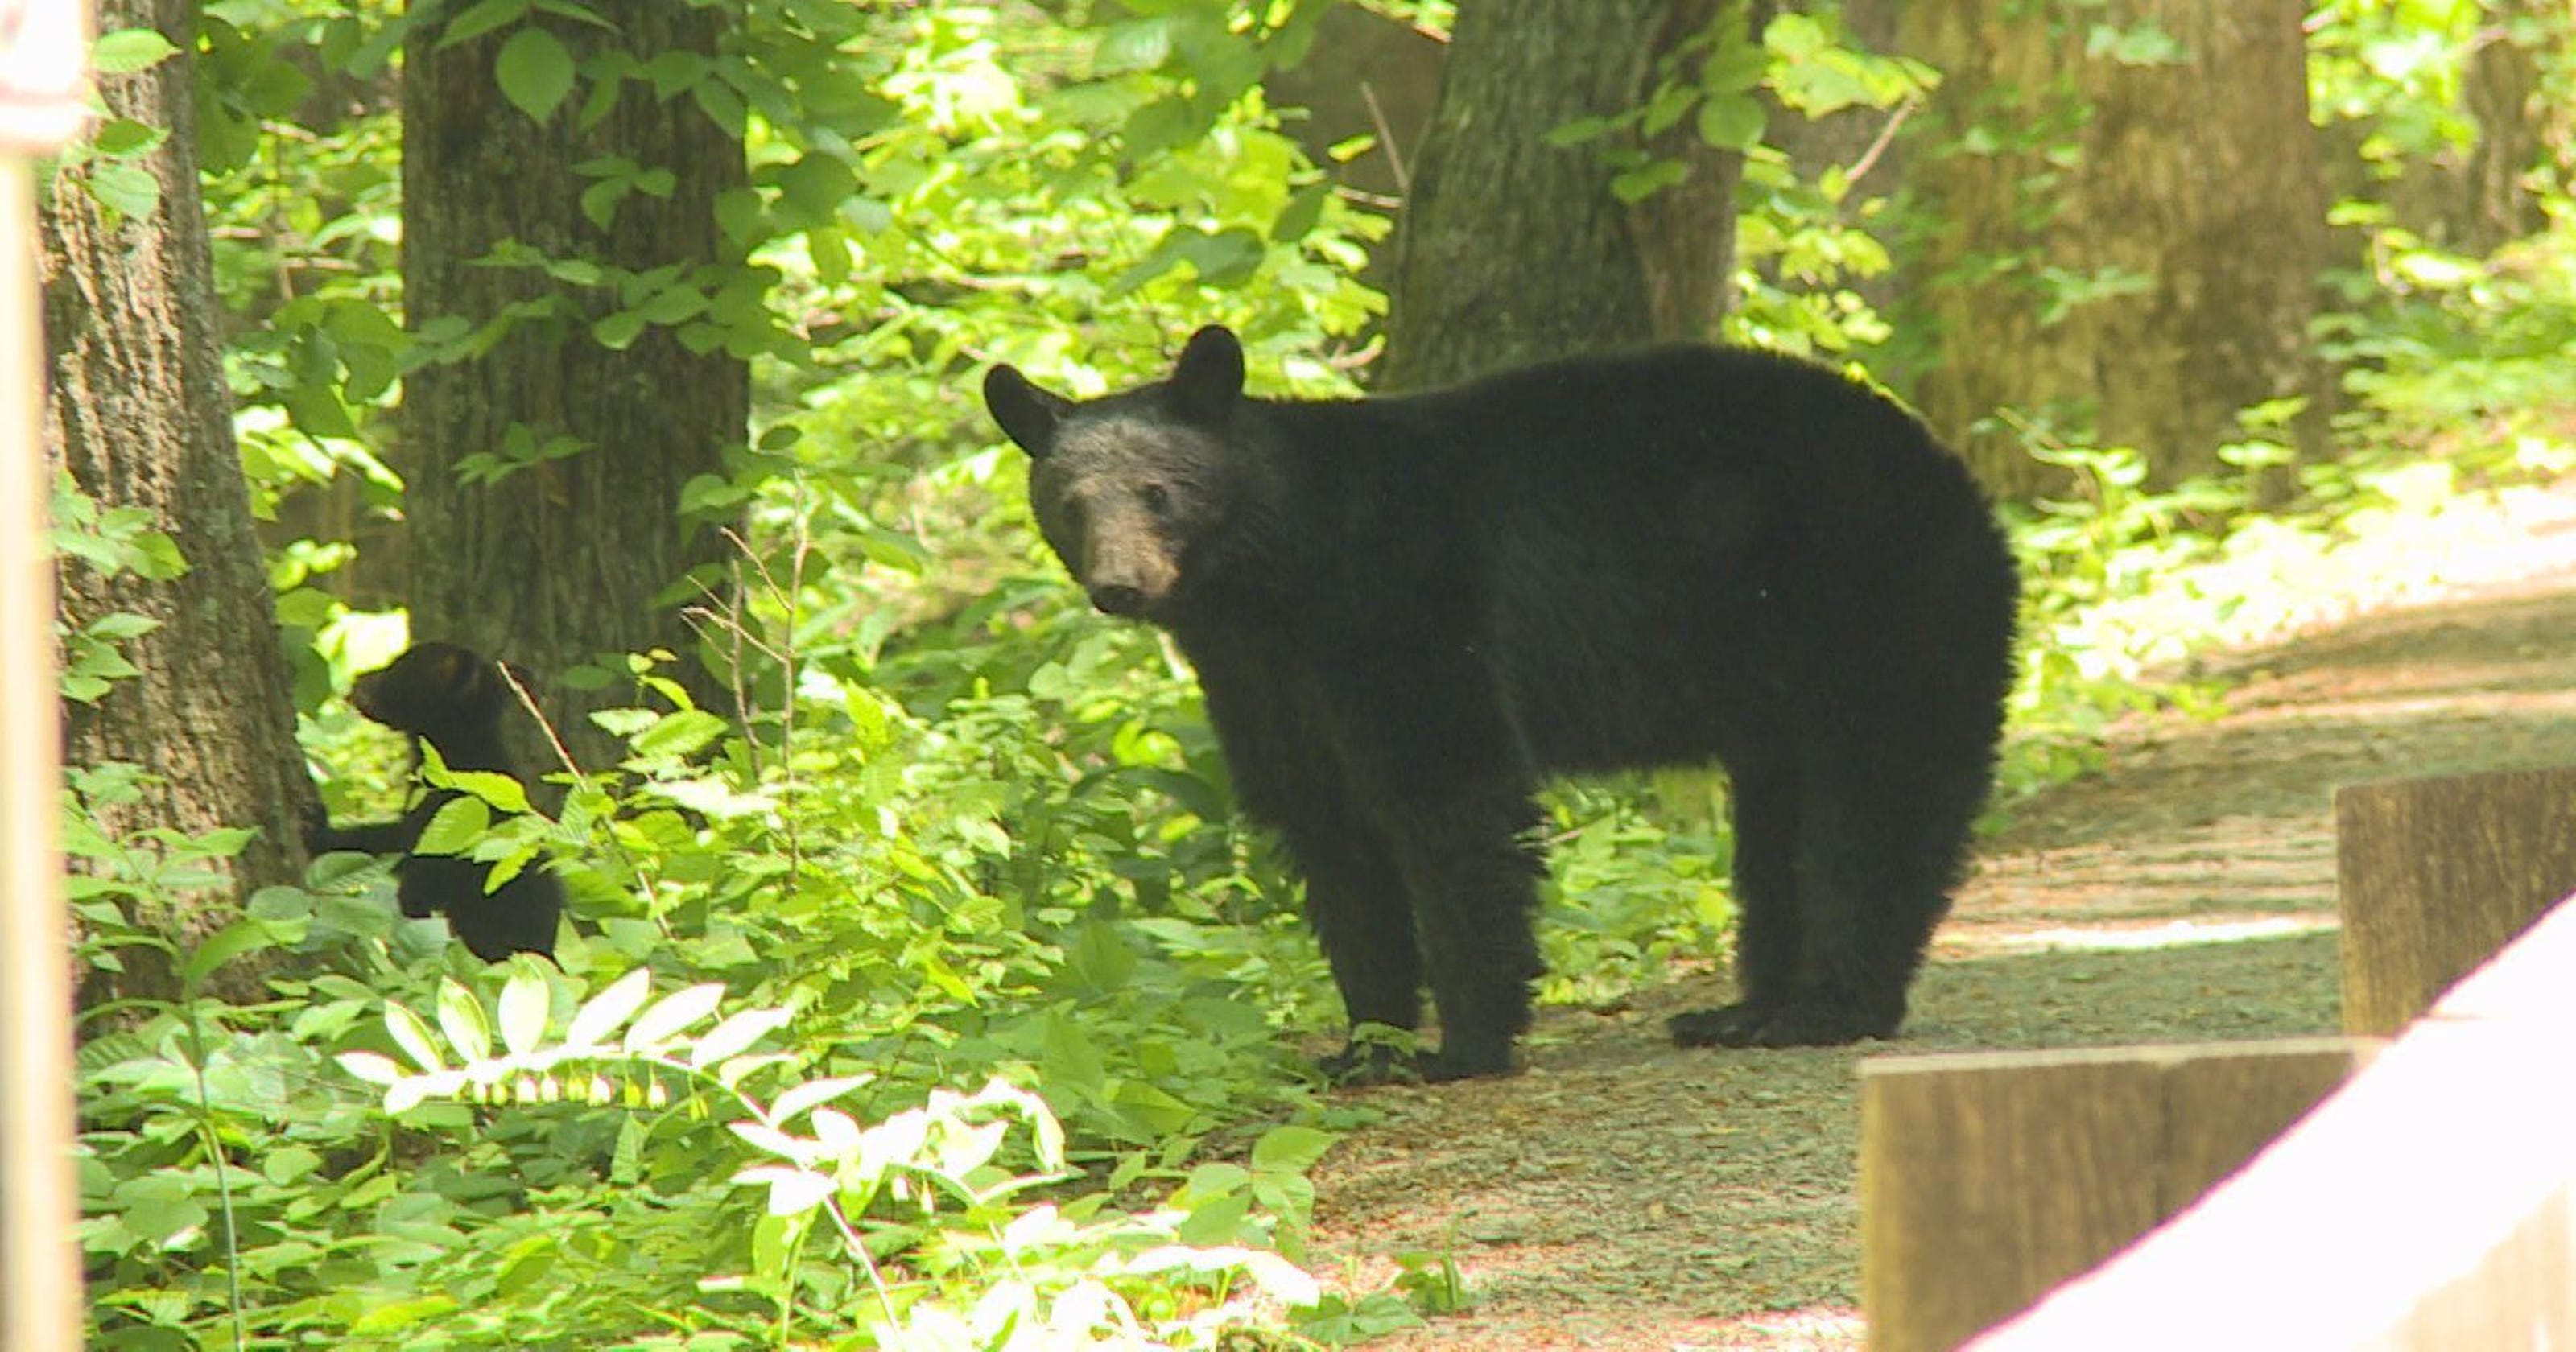 Be bear aware in South Carolina bear country, officials remind